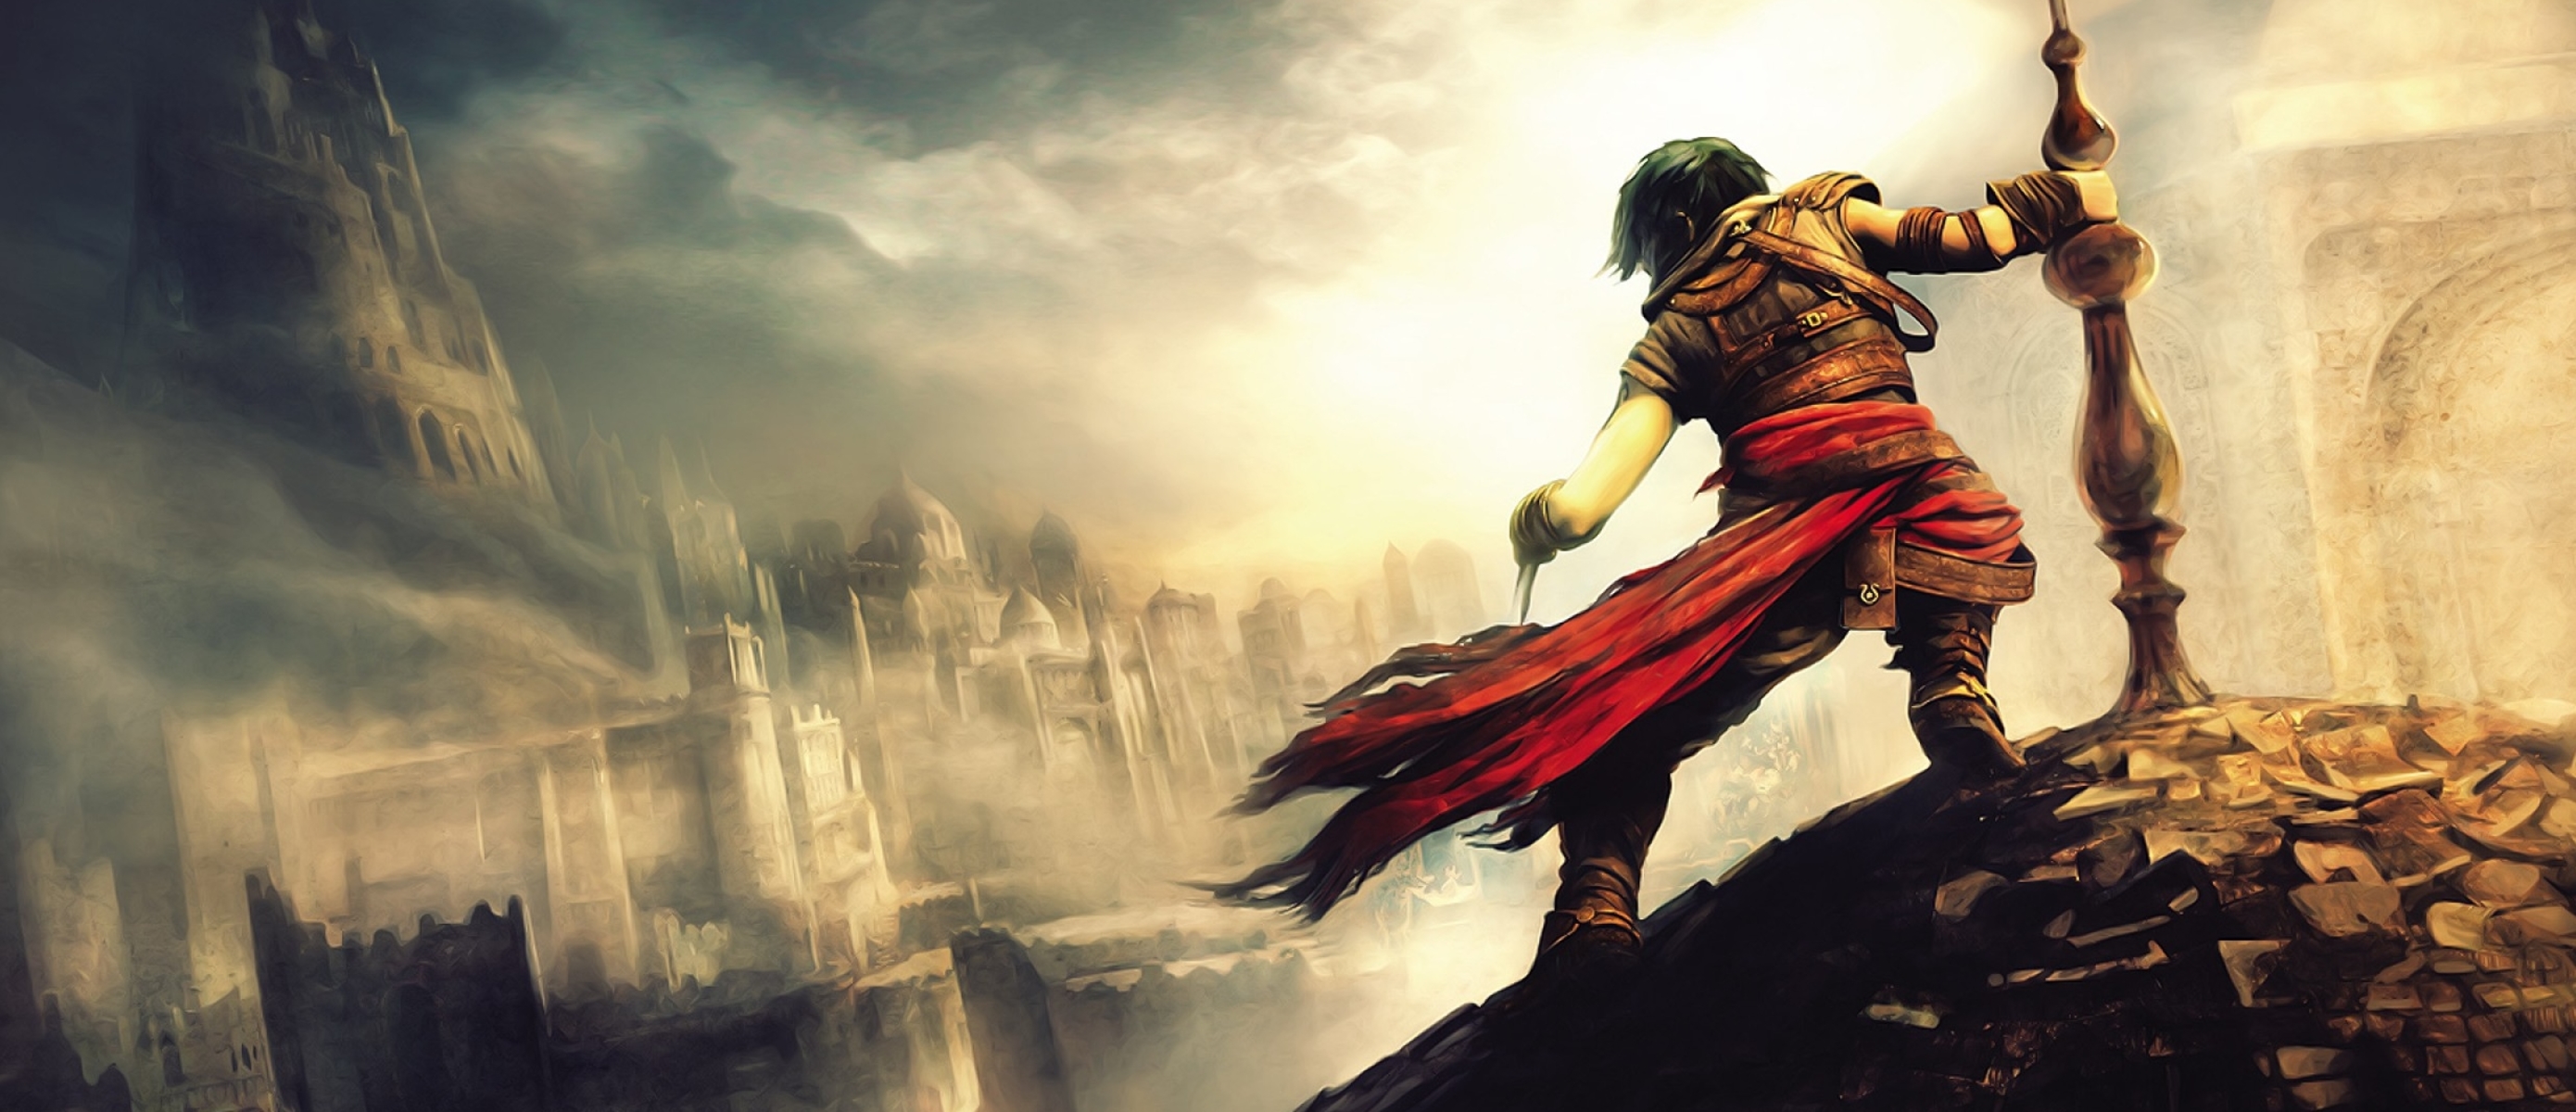 Prince of persia the two thrones steam фото 98